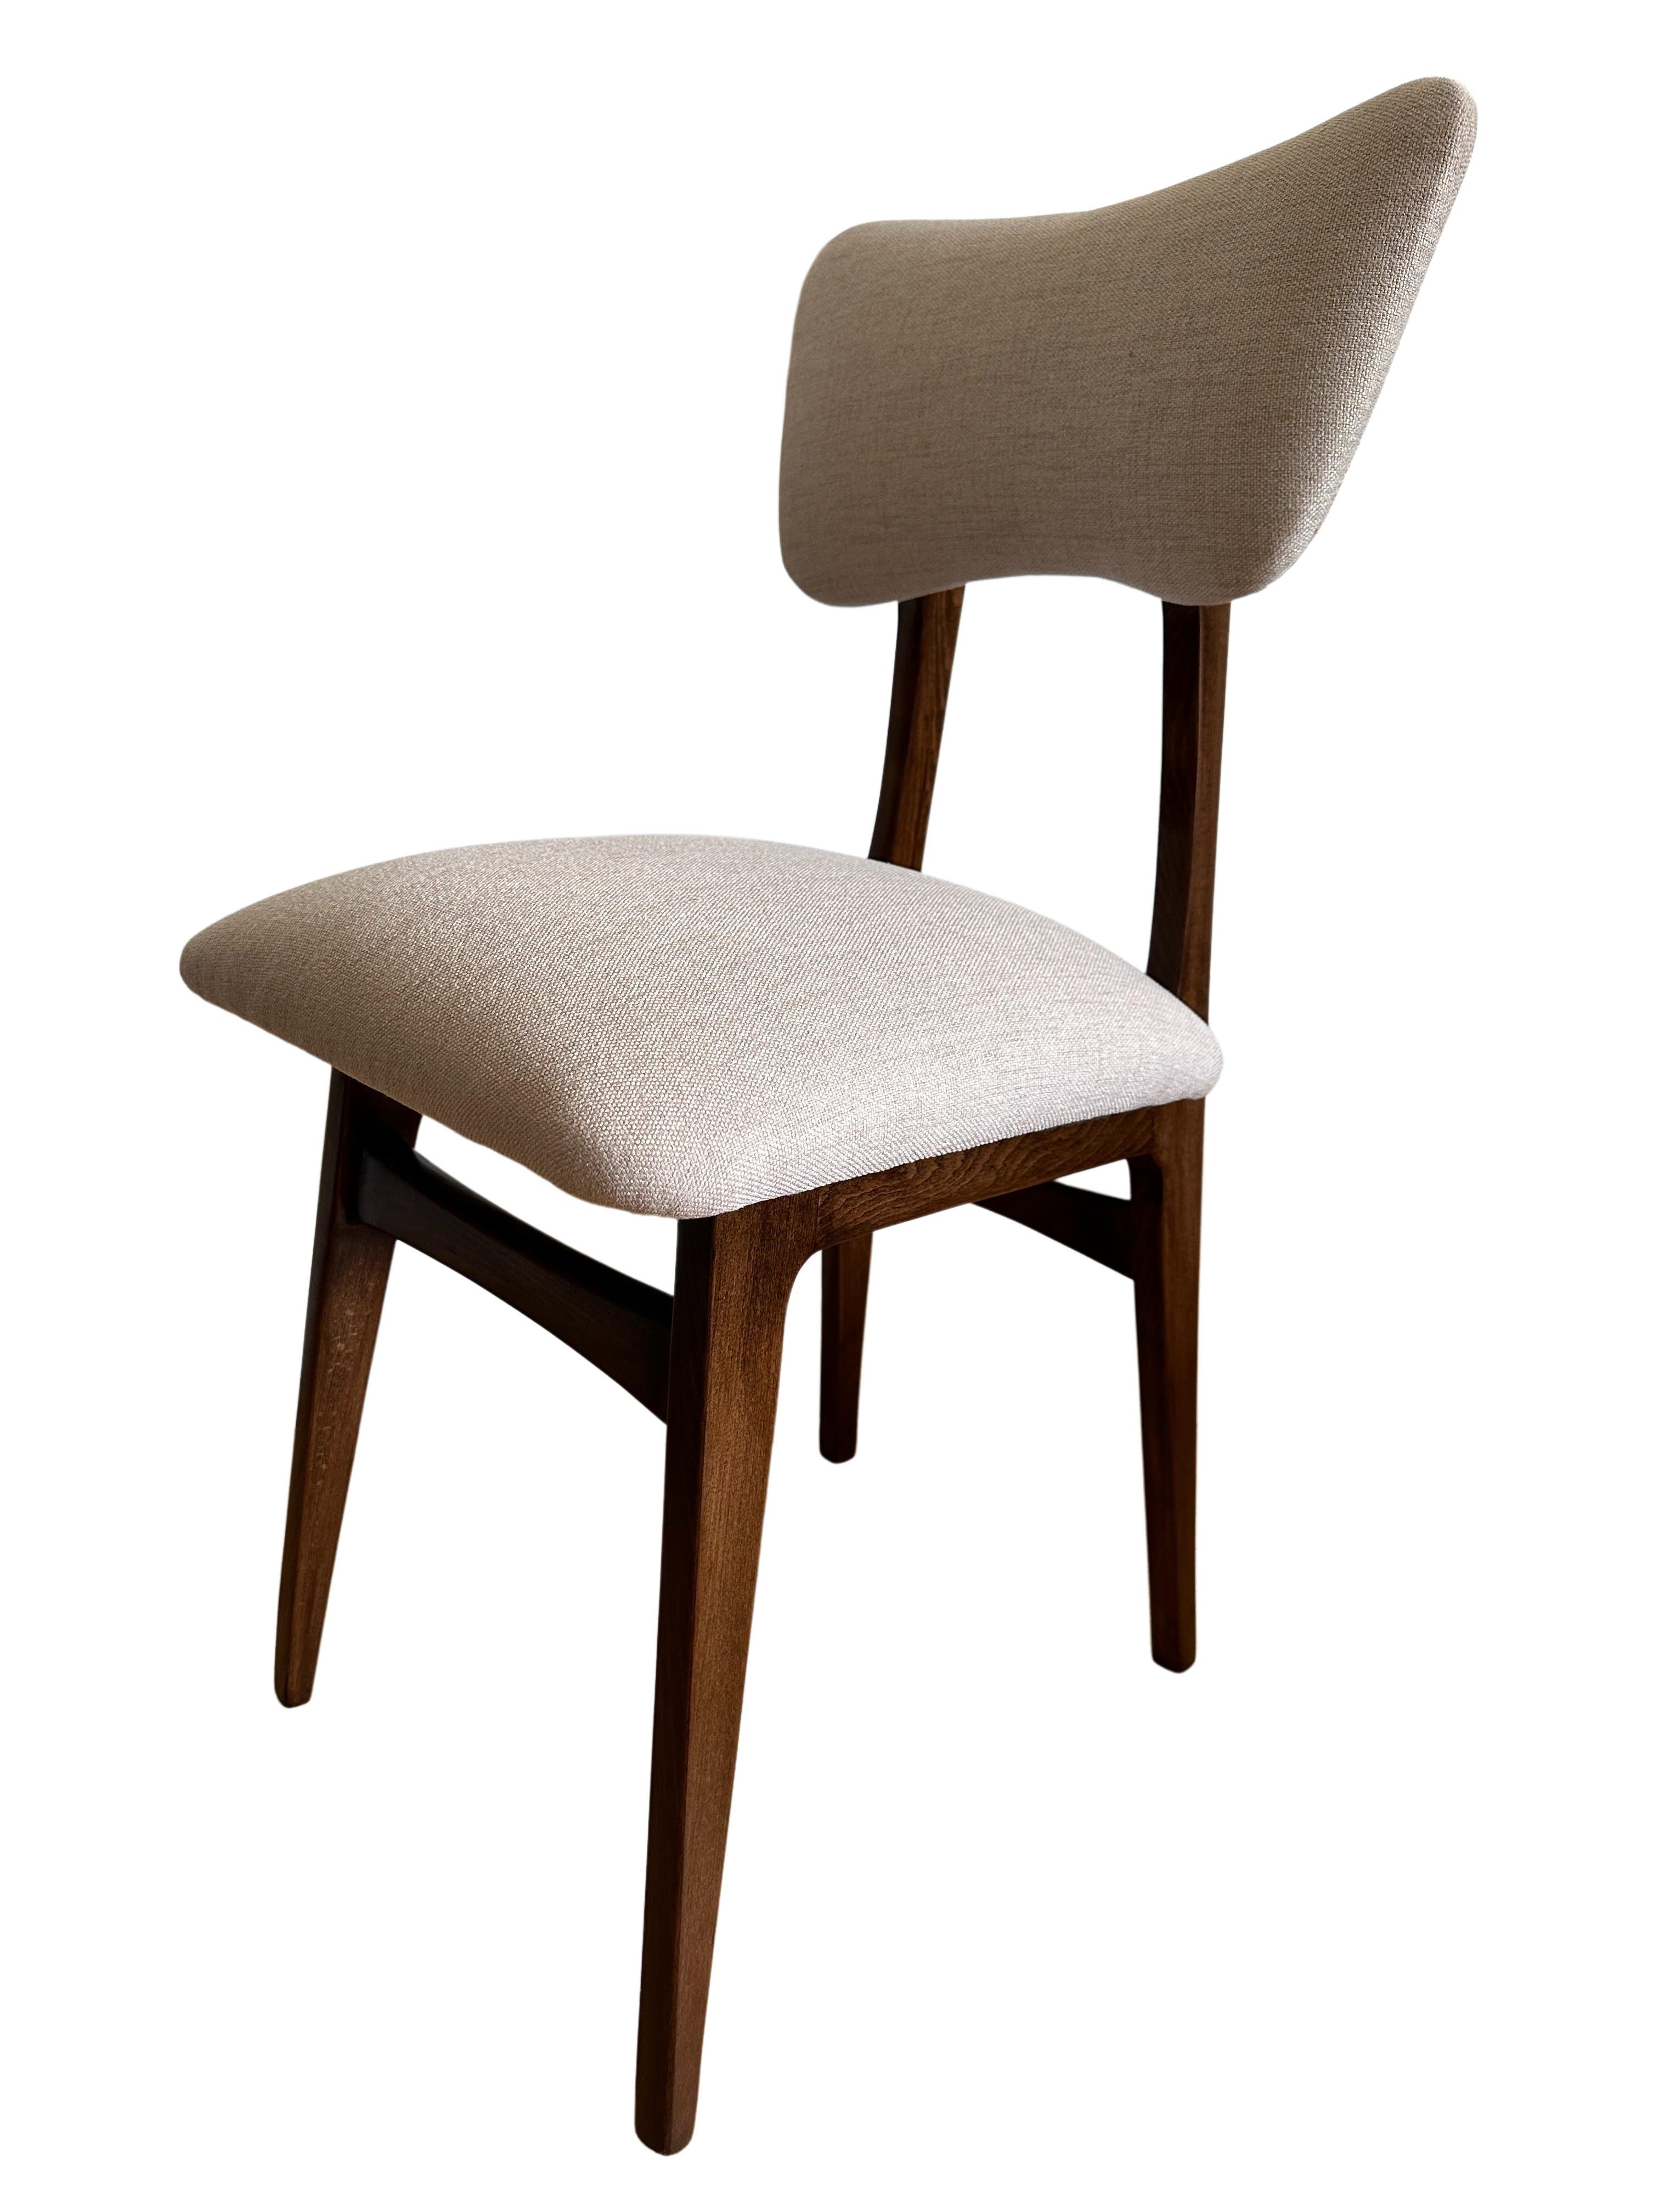 Hand-Crafted Set of Four Midcentury Beige Dining Chairs, Europe, 1960s For Sale